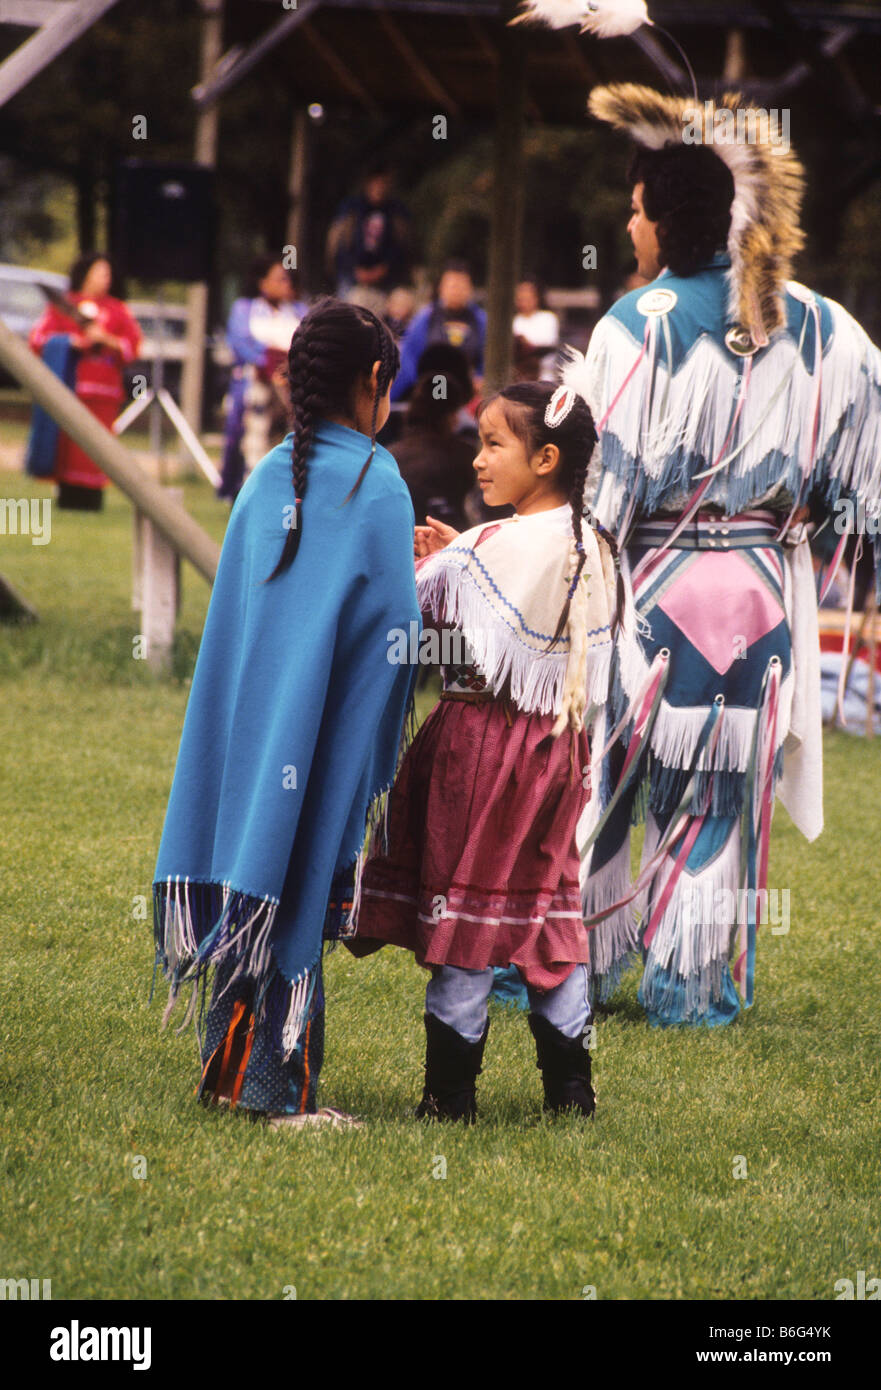 Native American Indians celebrate and dance at powwow. Stock Photo